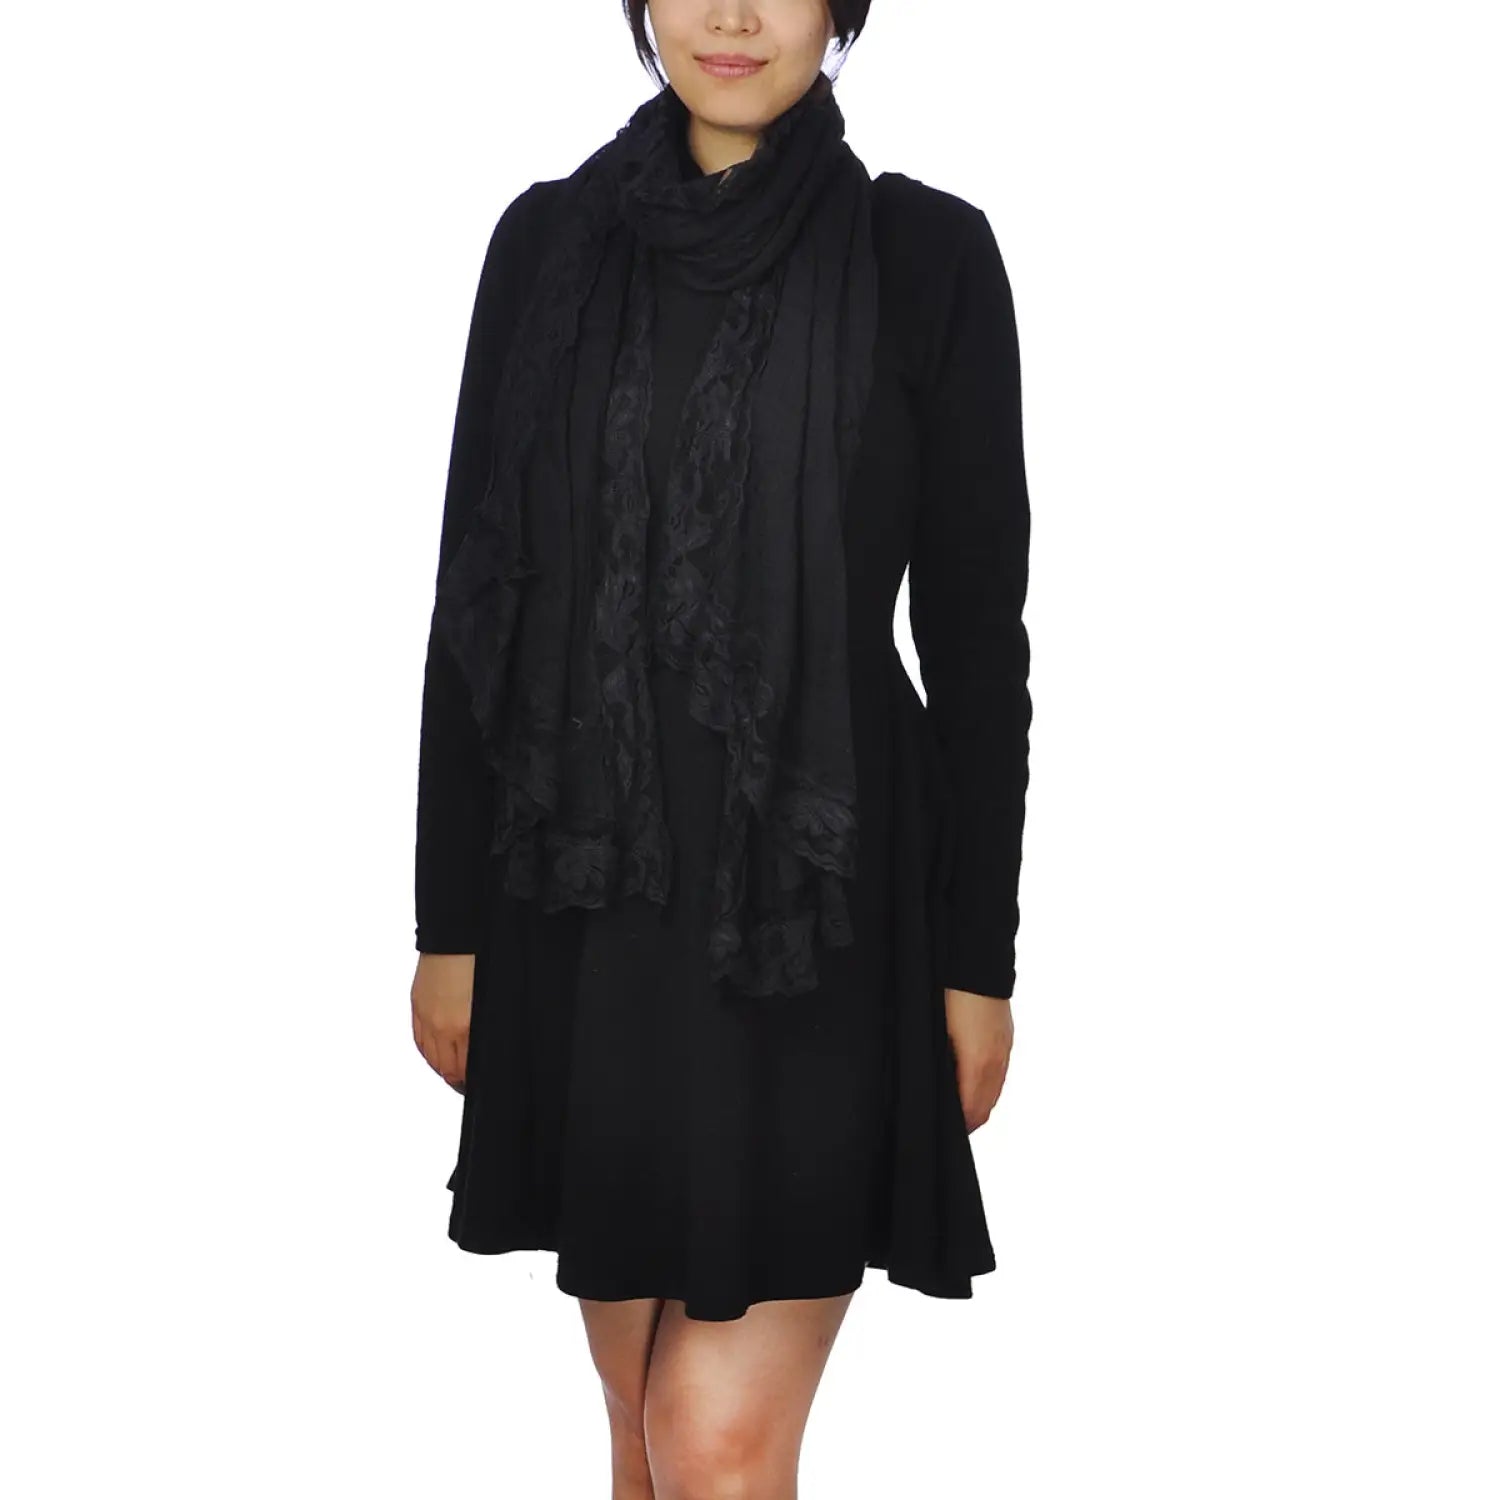 Woman wearing black cotton crinkled lace evening scarf.